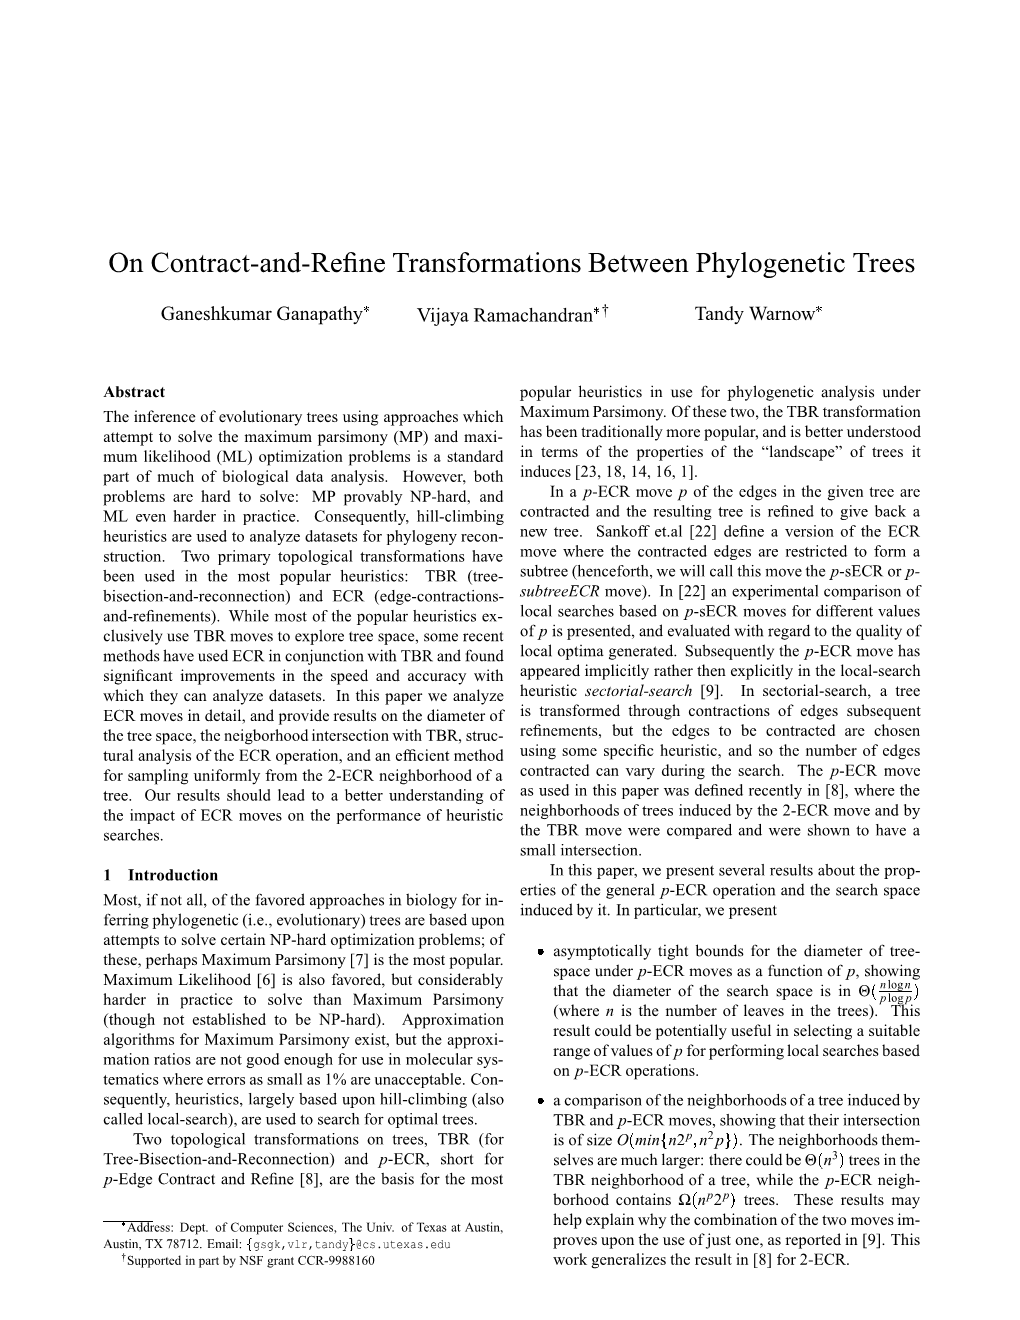 On Contract-And-Refine Transformations Between